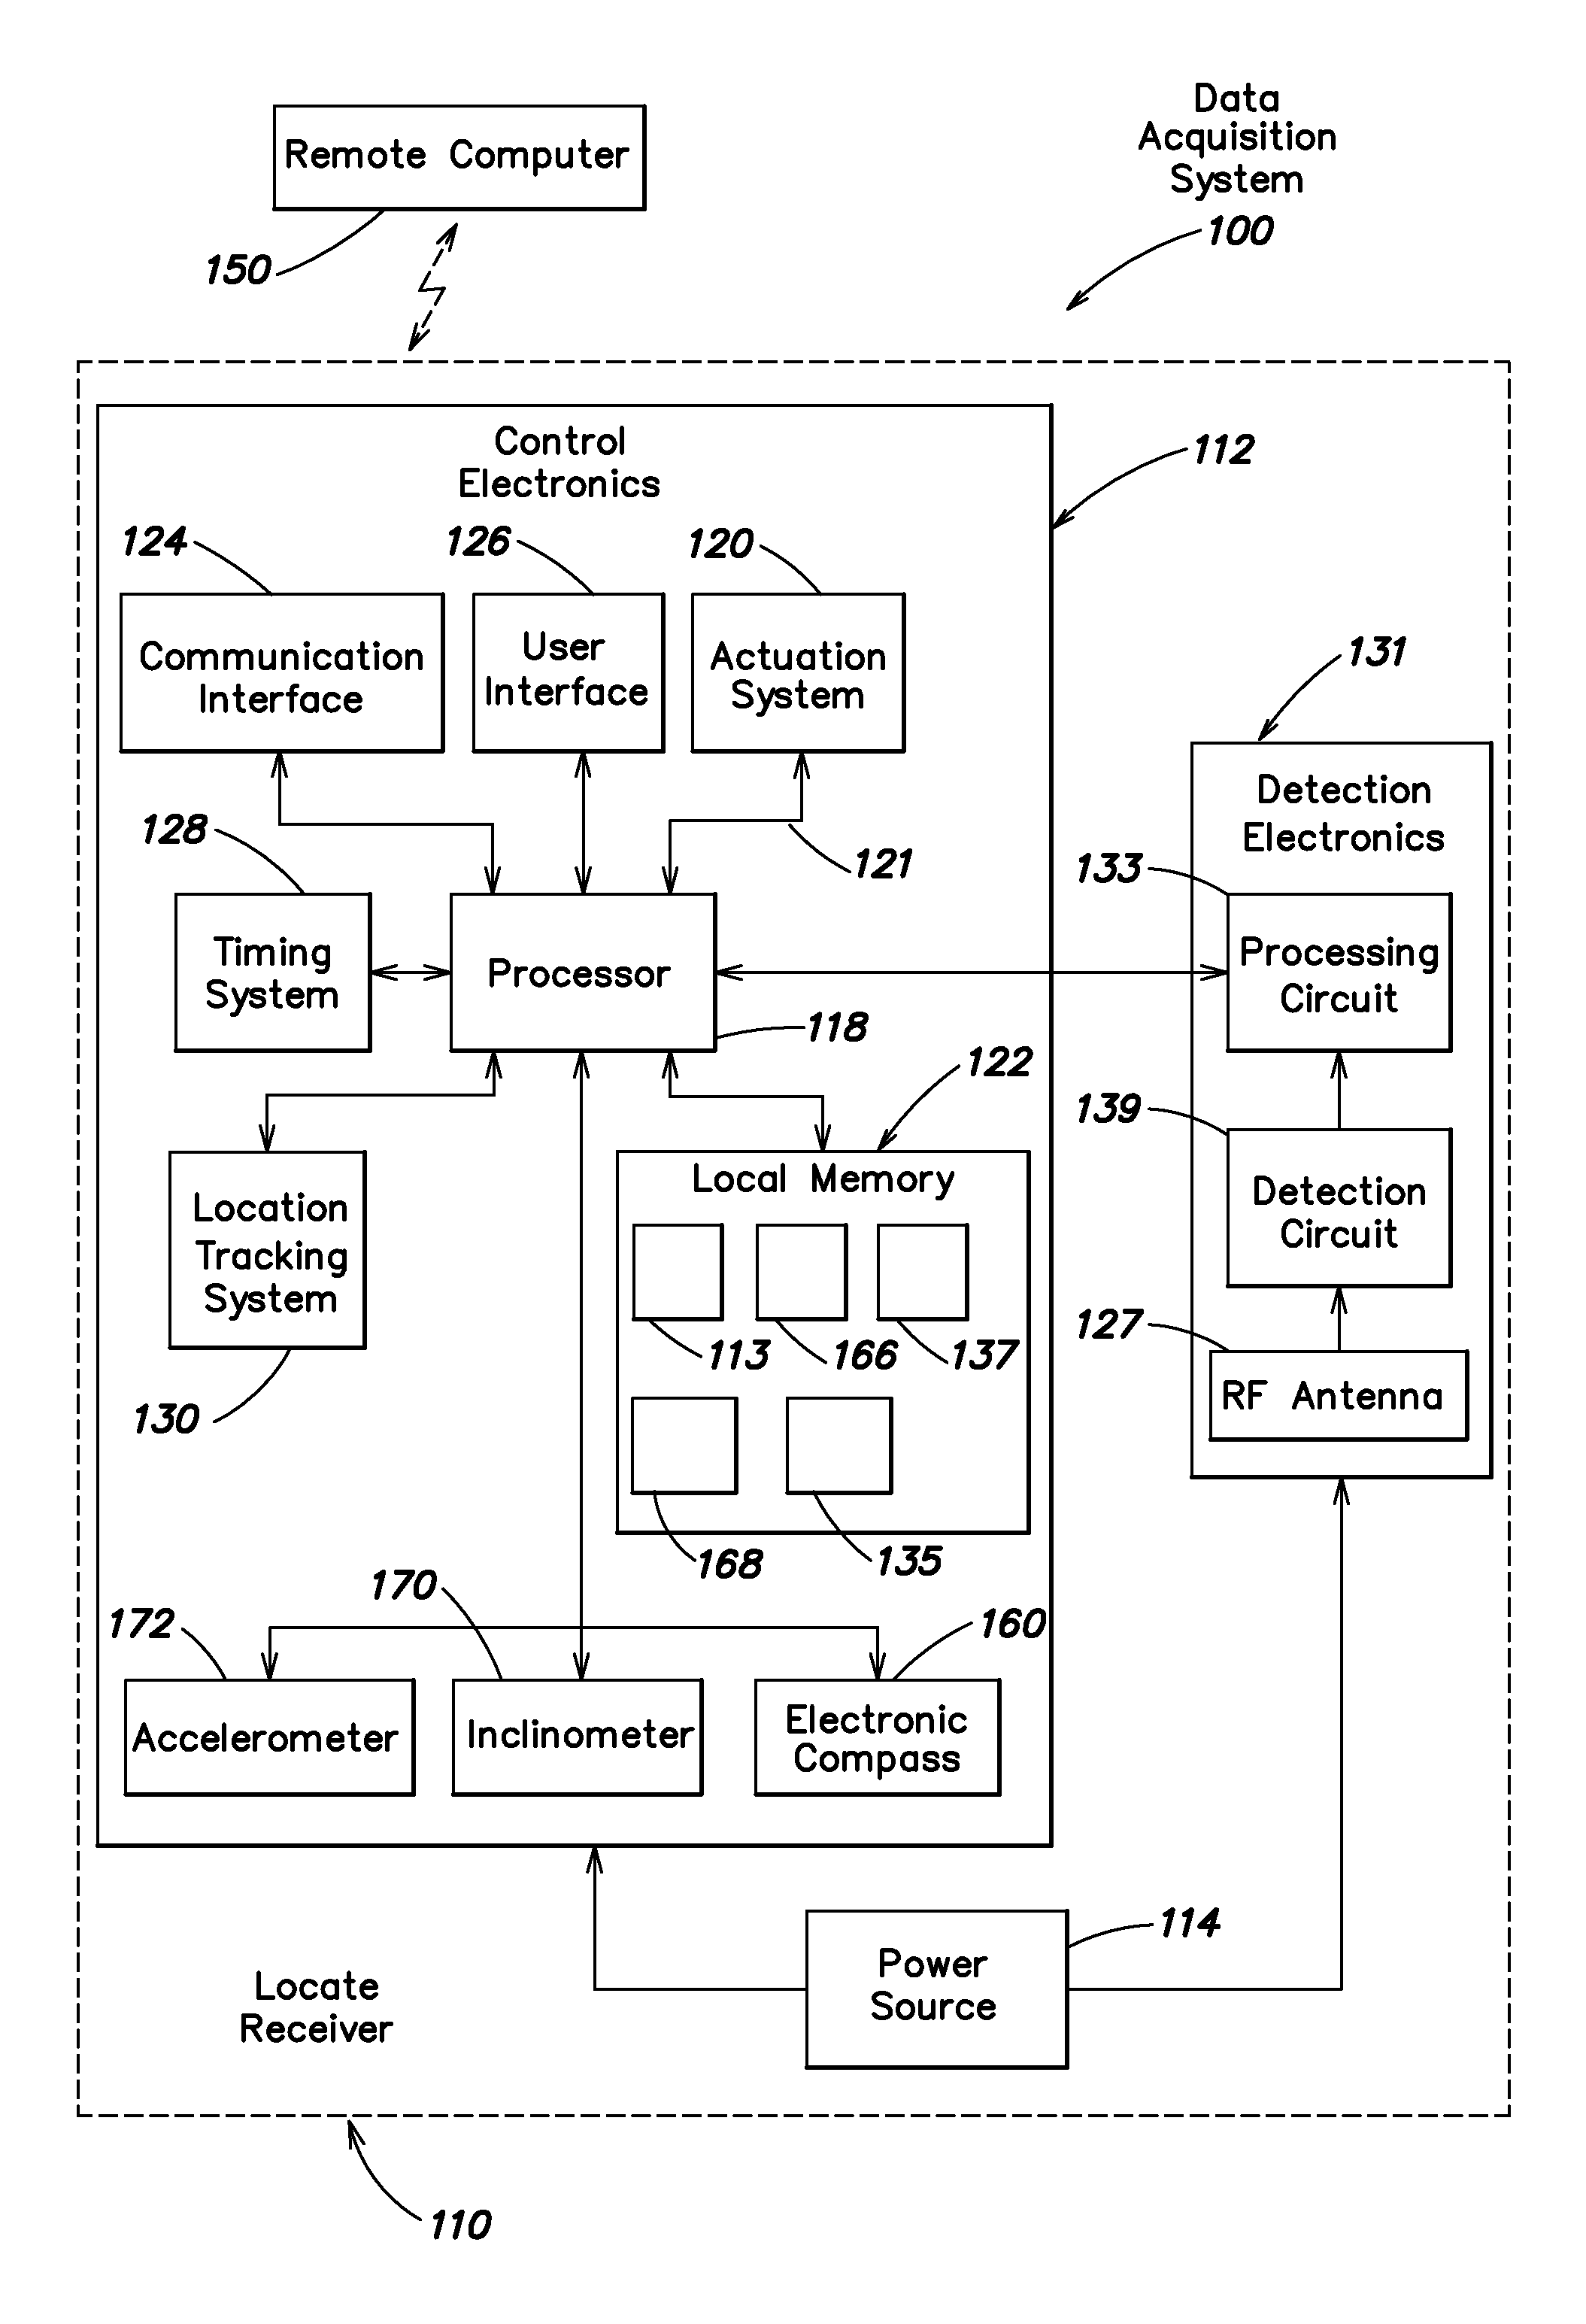 Methods and apparatus for displaying and processing facilities map information and/or other image information on a locate device